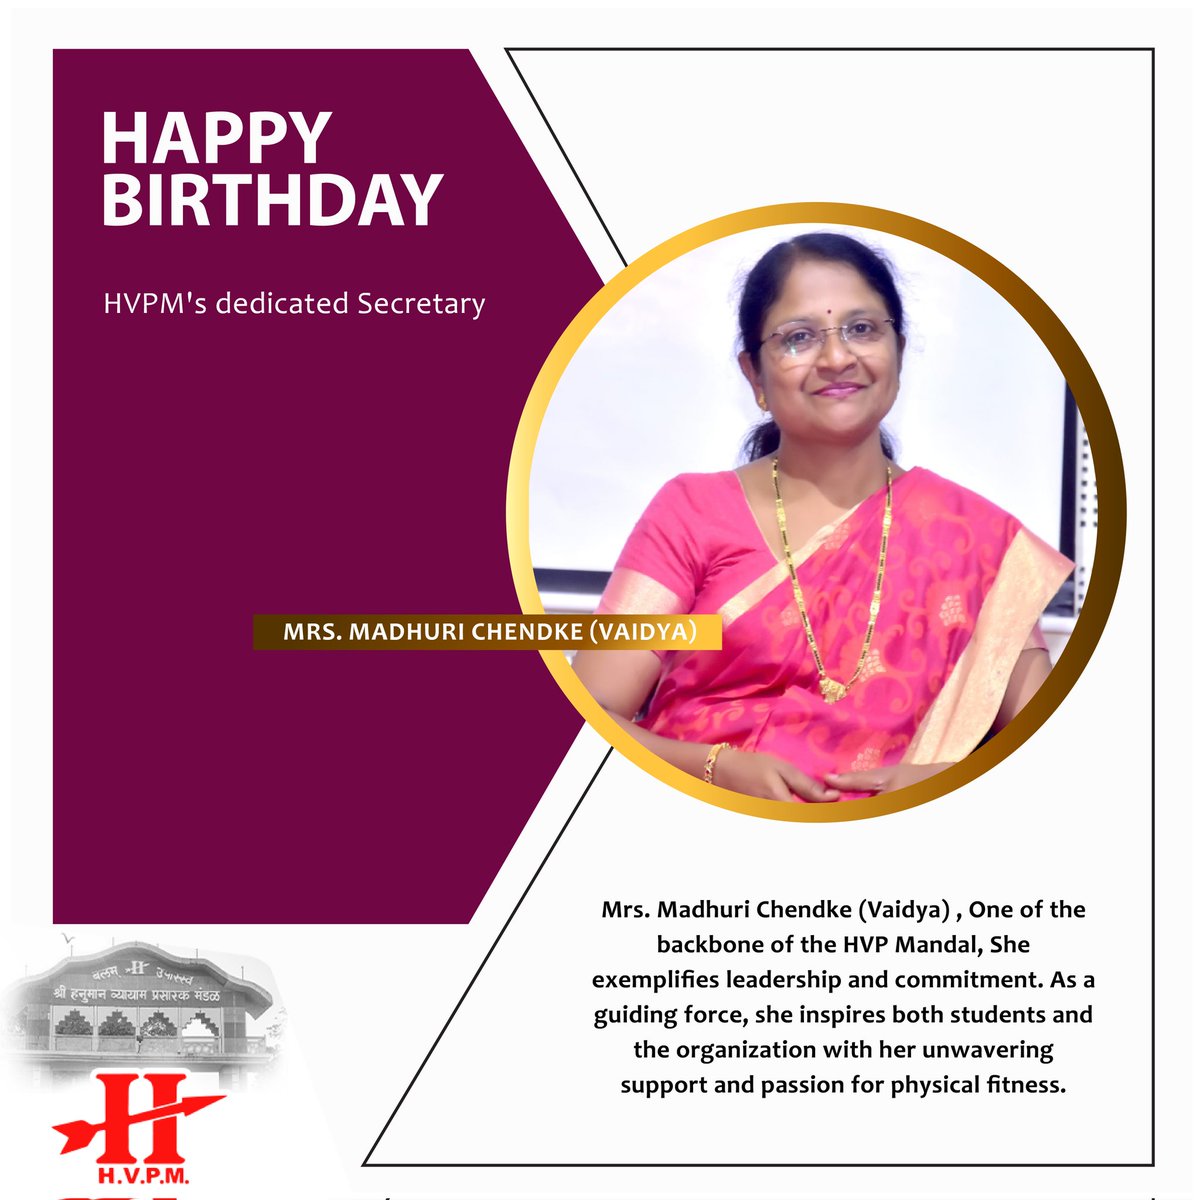 Happy Birthday 💐💐to the personality who doesn't need any introduction - Dr. Madhuri Chendke(Vaidya)! 🎉 As the dynamic secretary of HVPM, her name resonates with dedication, leadership, and inspiration. 🎂 💫 🎈 #HappyBirthday #Inspiration #HVPMLeader #madhurichendke